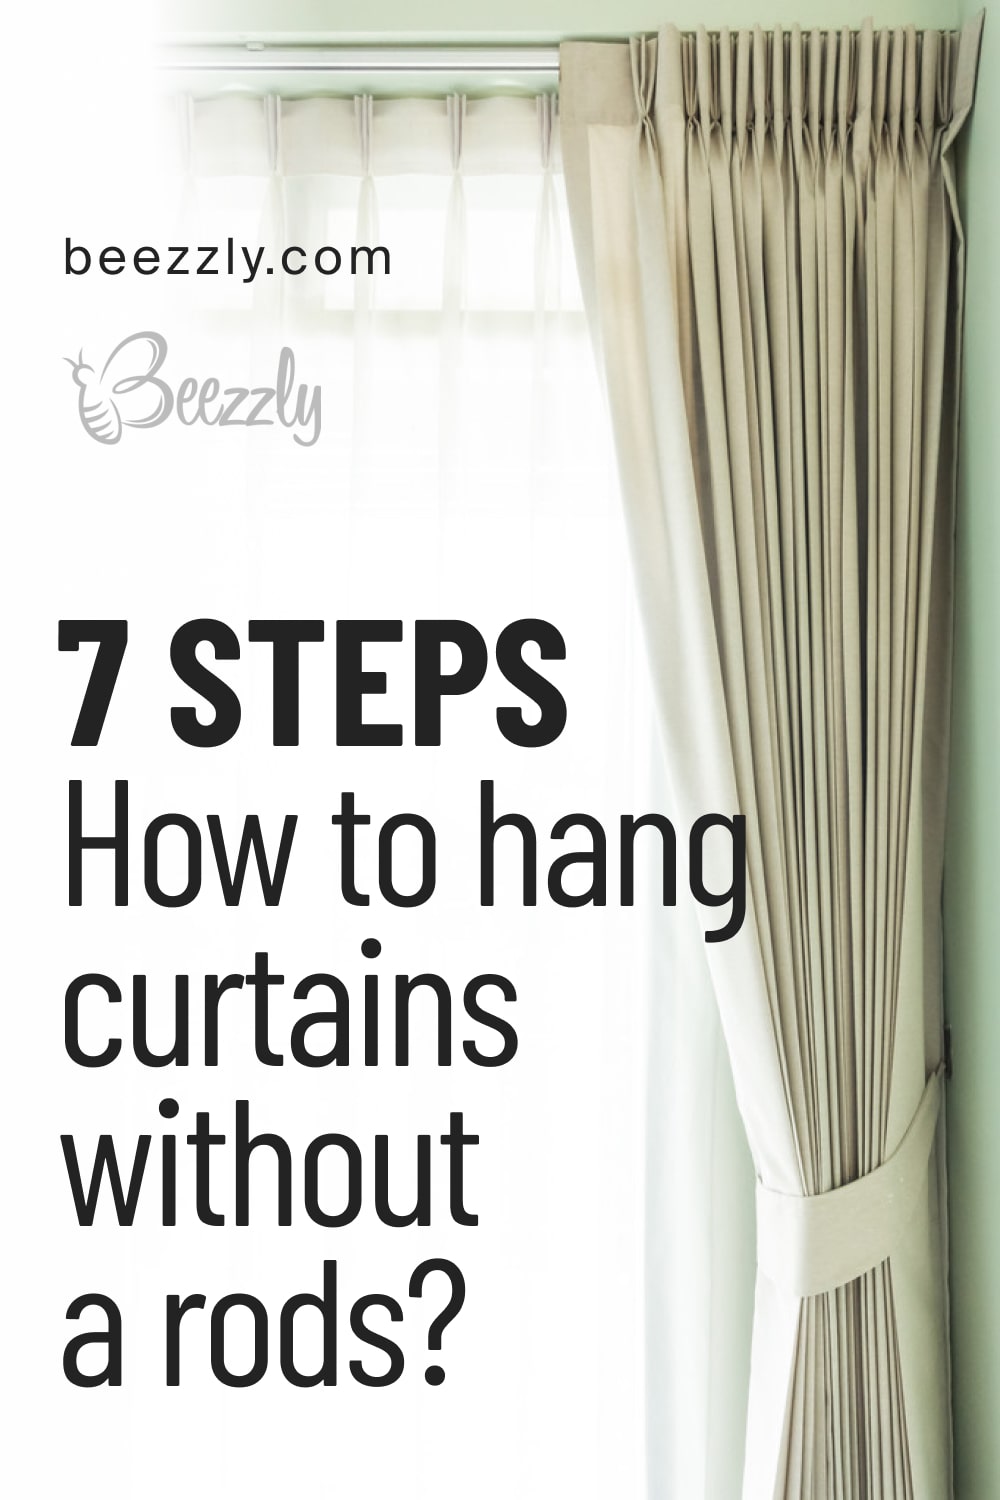 7 steps. How to hang curtains without a rods